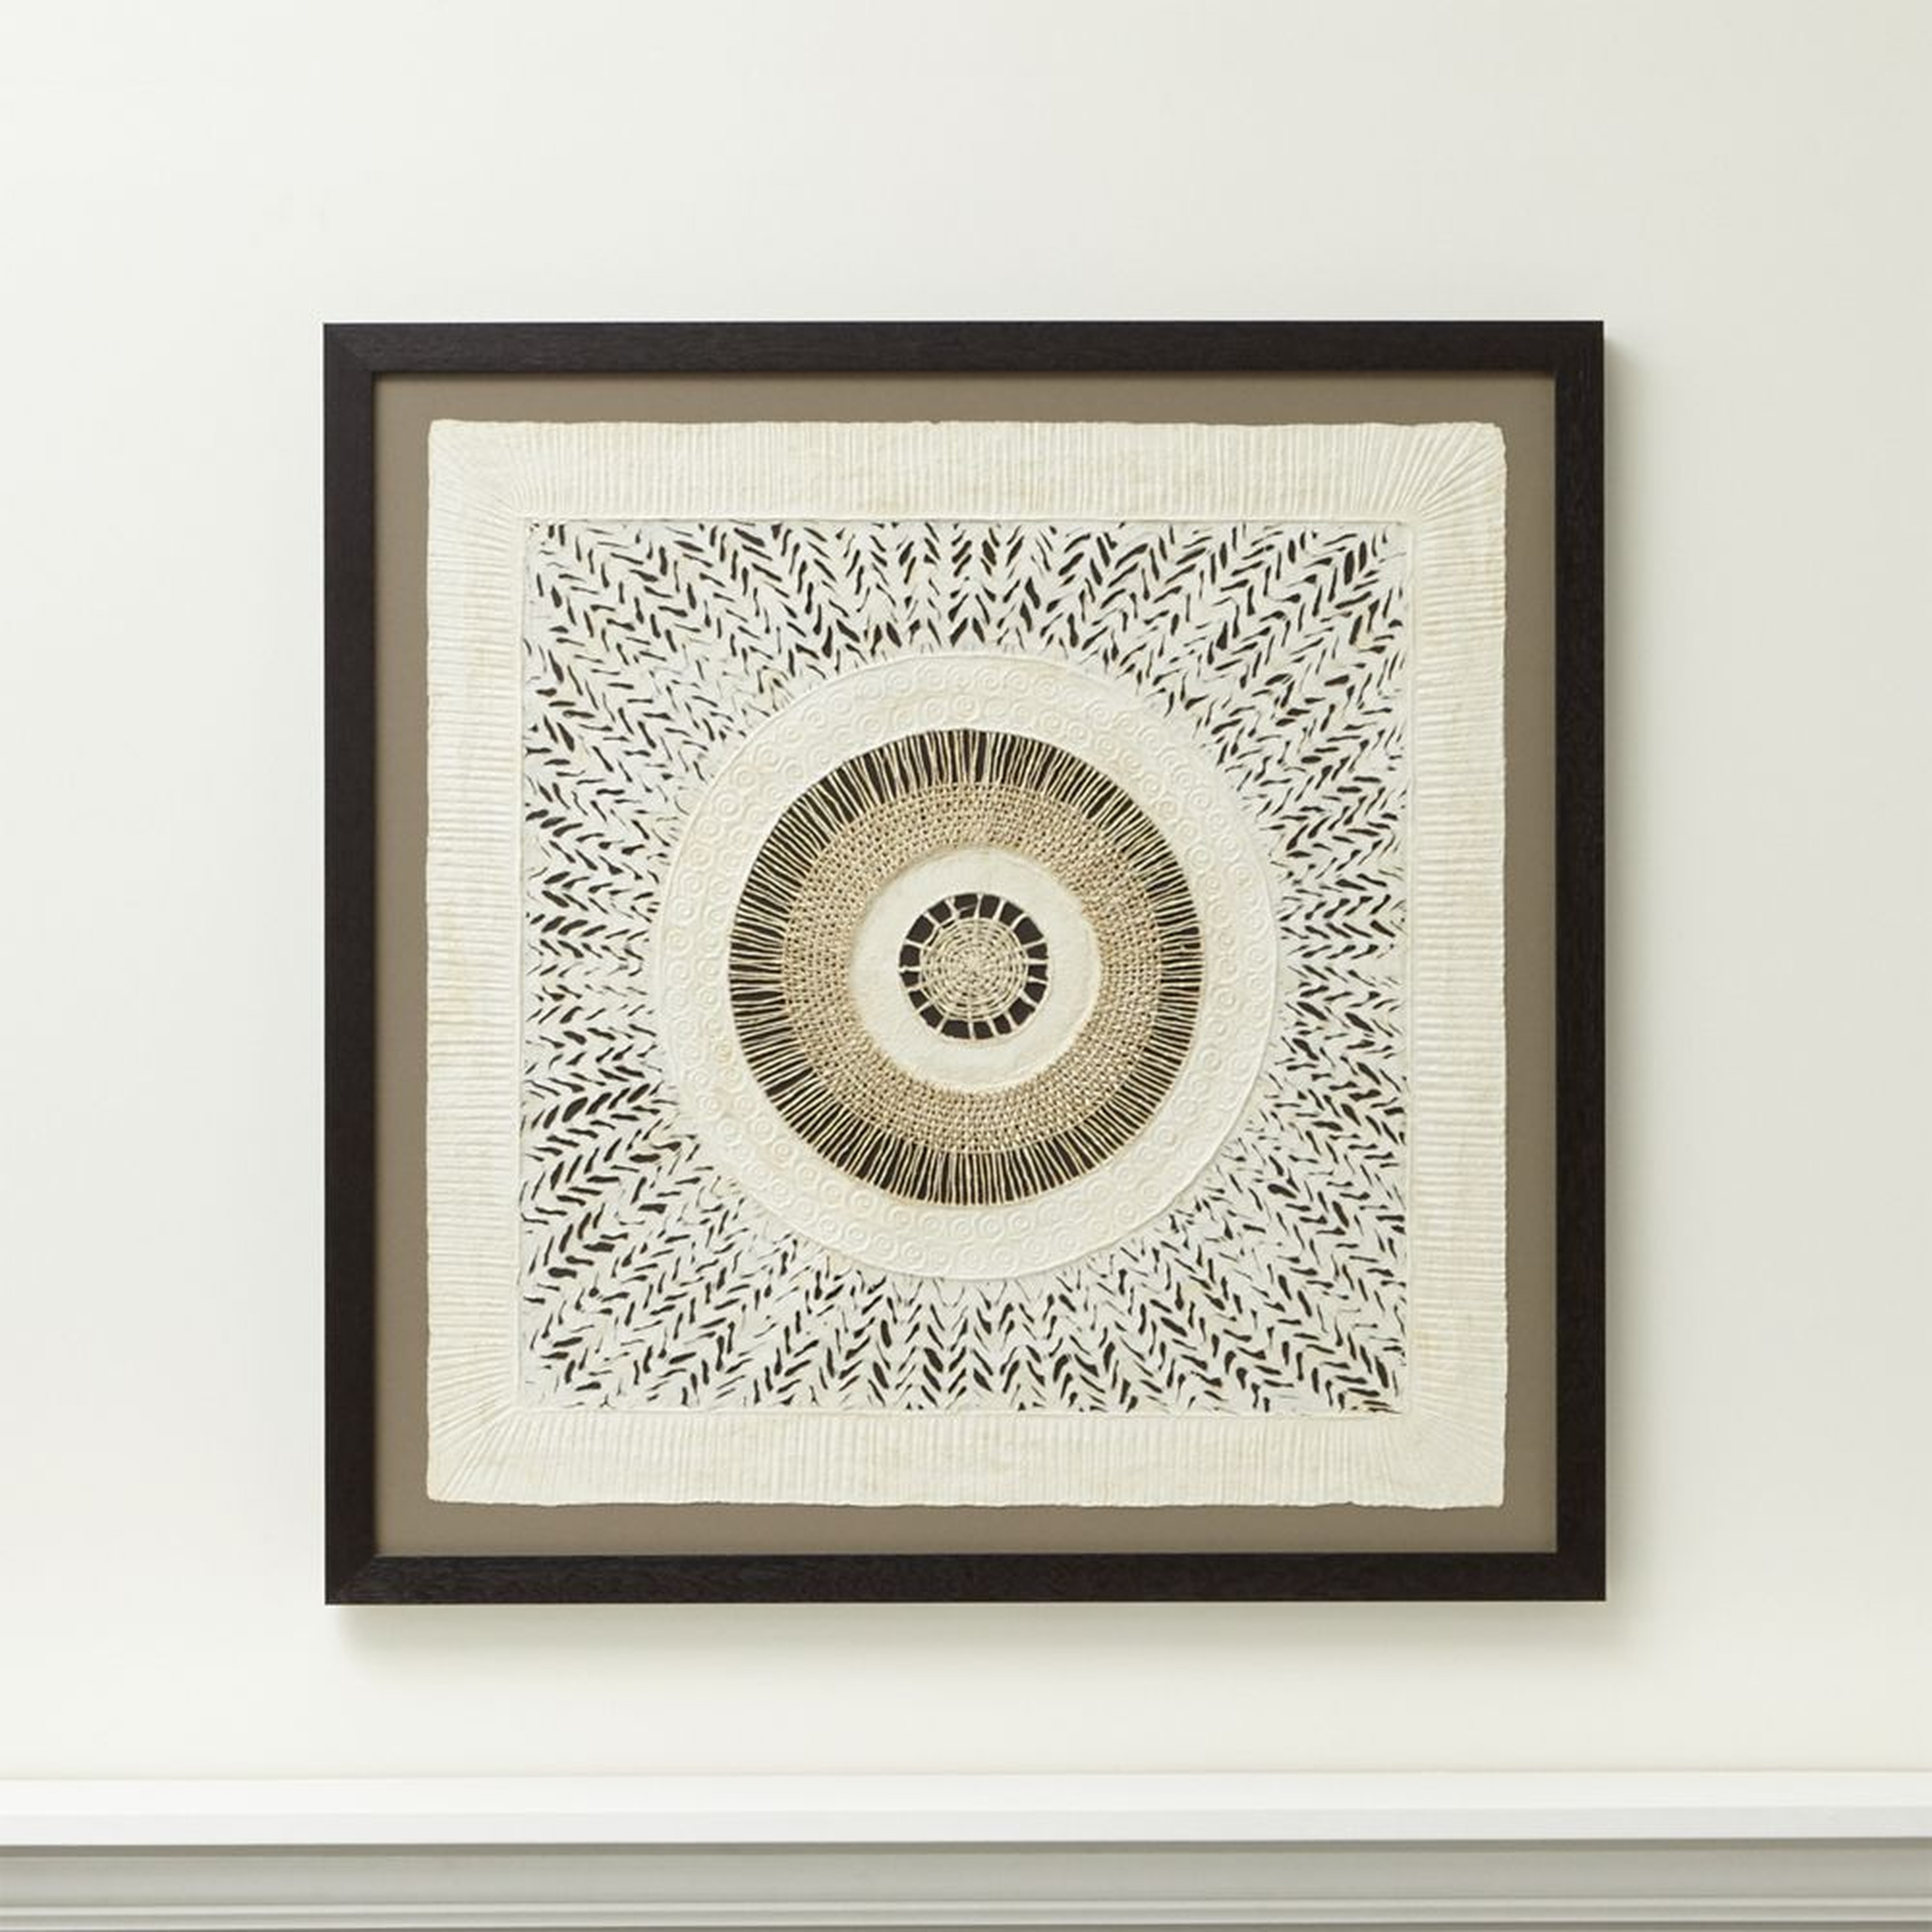 "Circulo de Papel" Framed Hand-Crafted Paper Wall Art 43"x43" by Julio Laja Chichicaxtle - Crate and Barrel